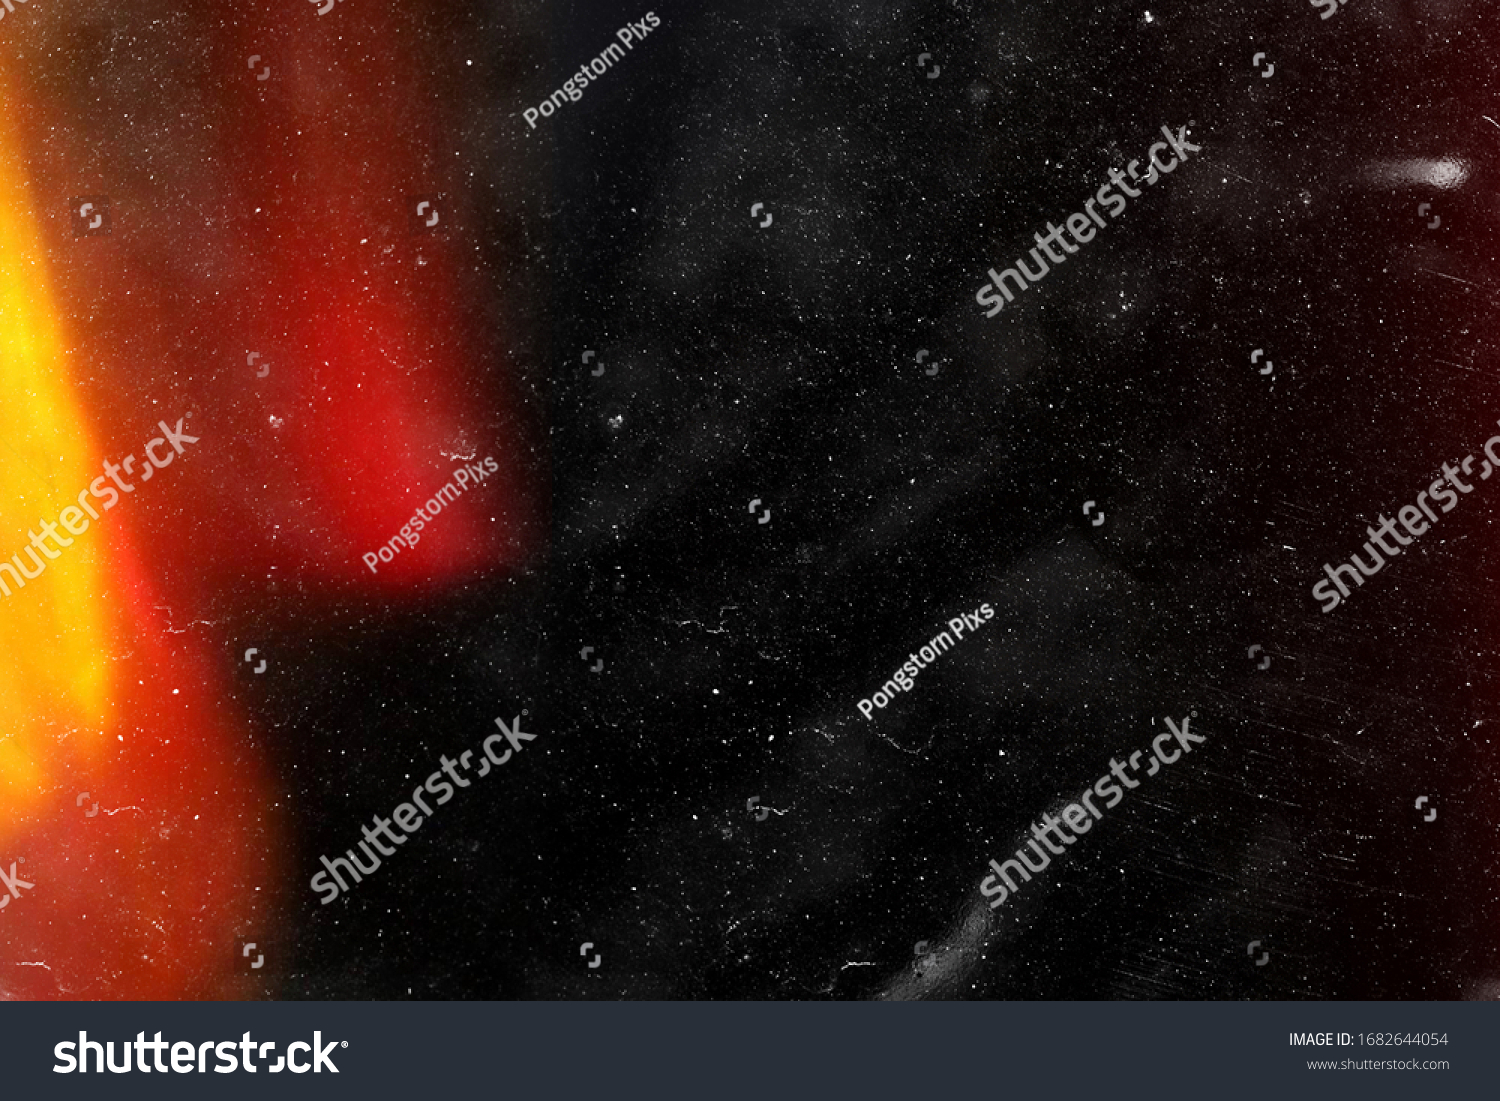 Designed film texture background with heavy grain, dust and a light leak Real Lens Flare Shot in Studio over Black Background. Easy to add as Overlay or Screen Filter over Photos overlay #1682644054